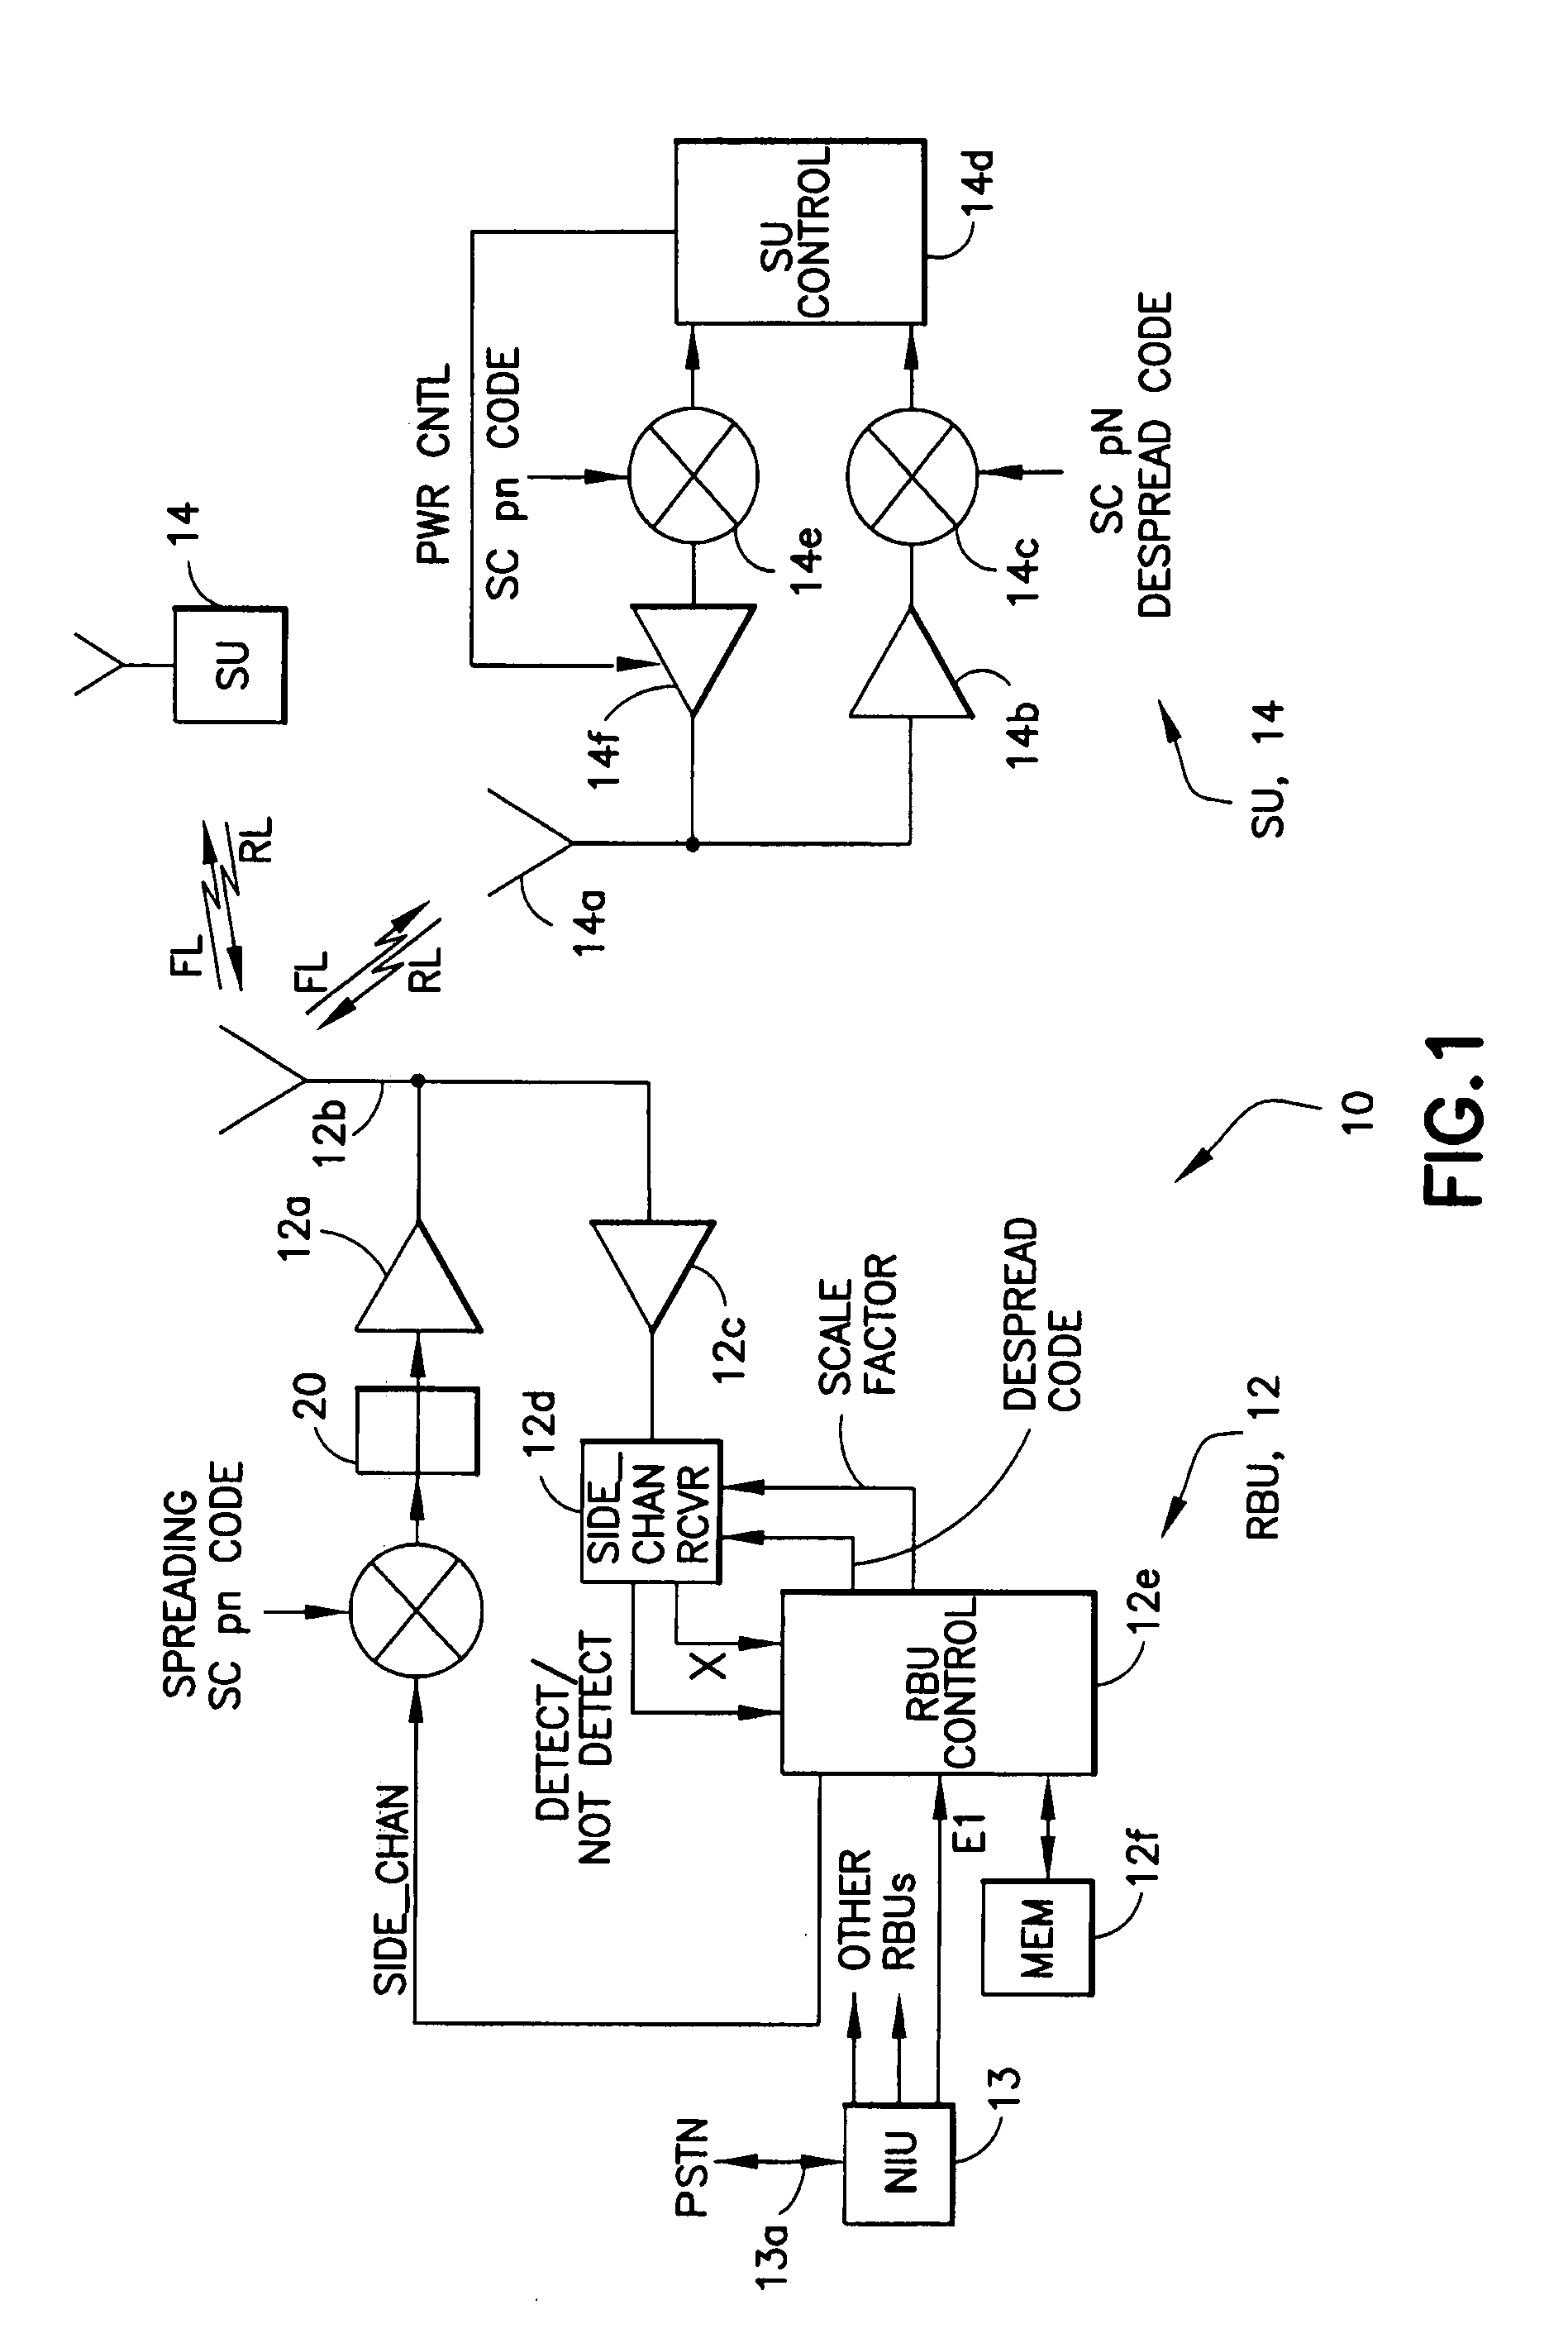 Method and system for baseband amplitude limiting